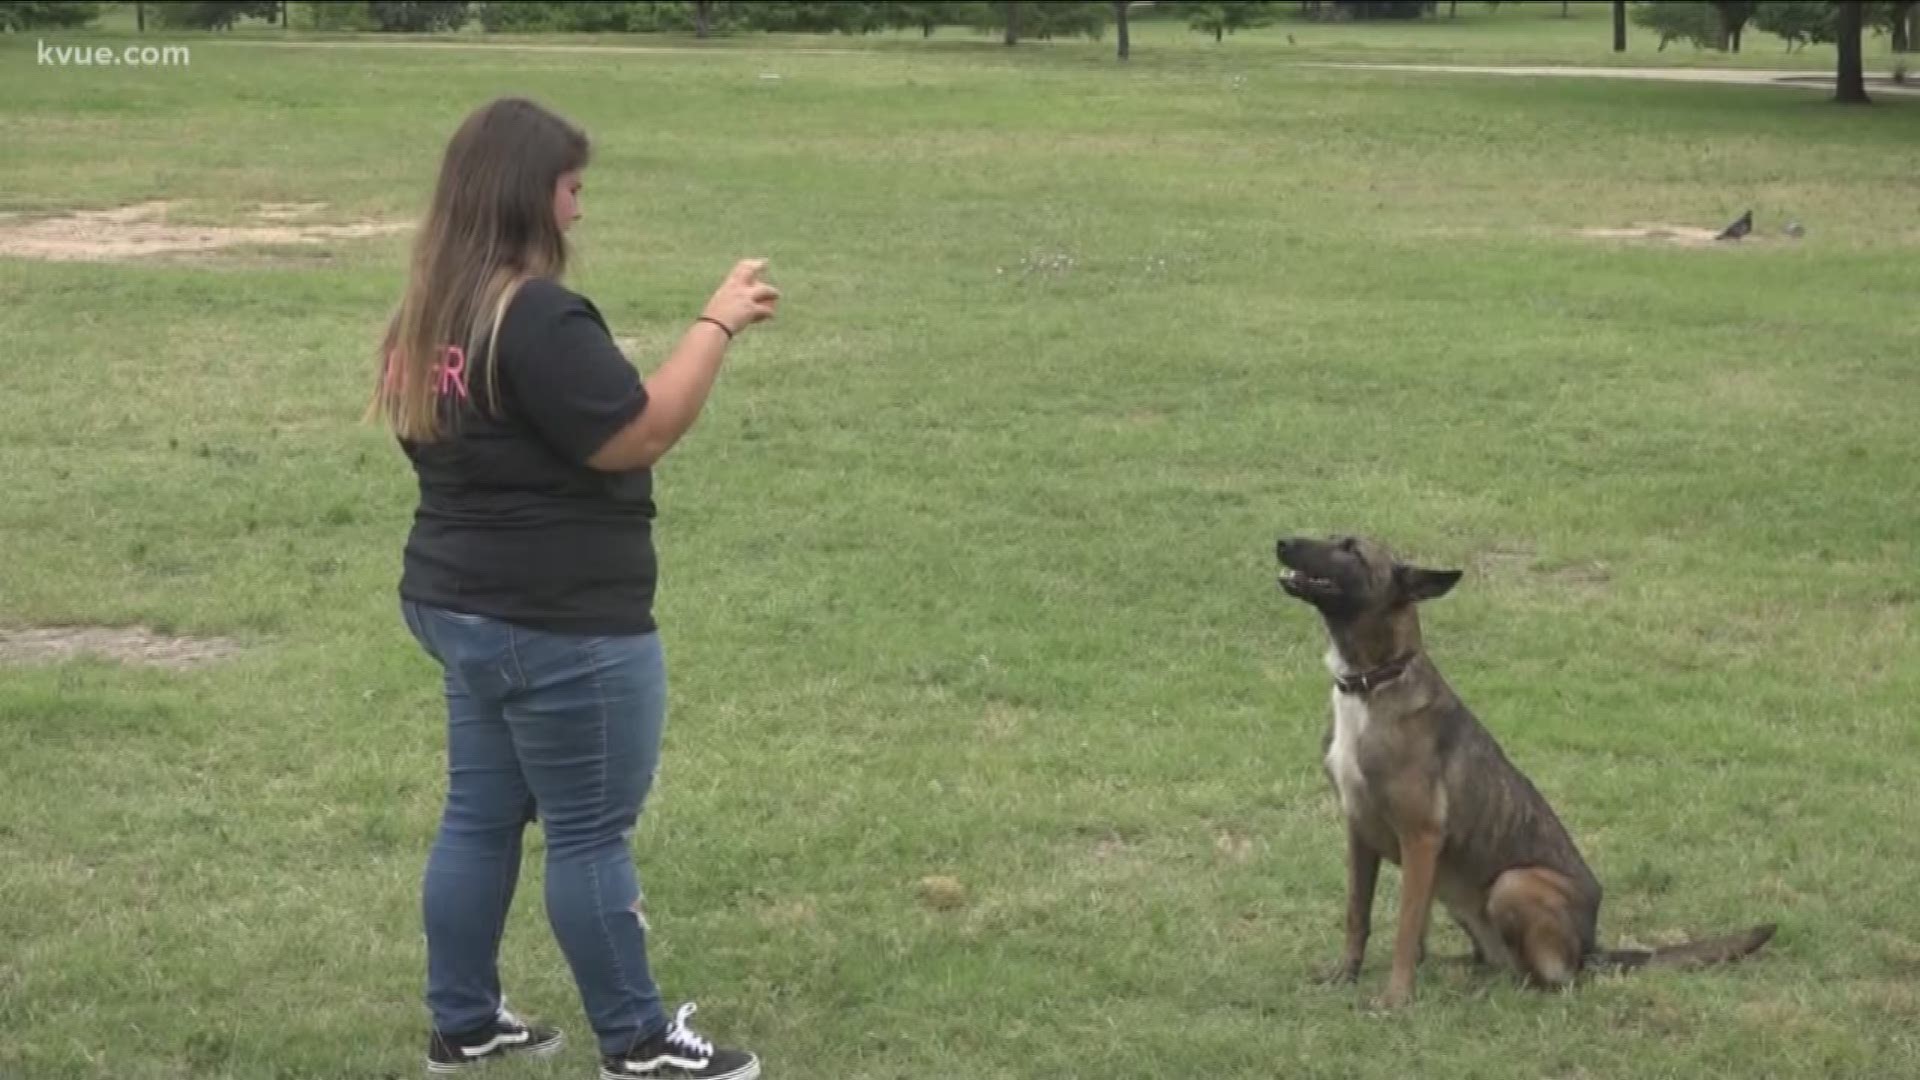 KVUE met two trainers who work to fix that aggressive behavior.